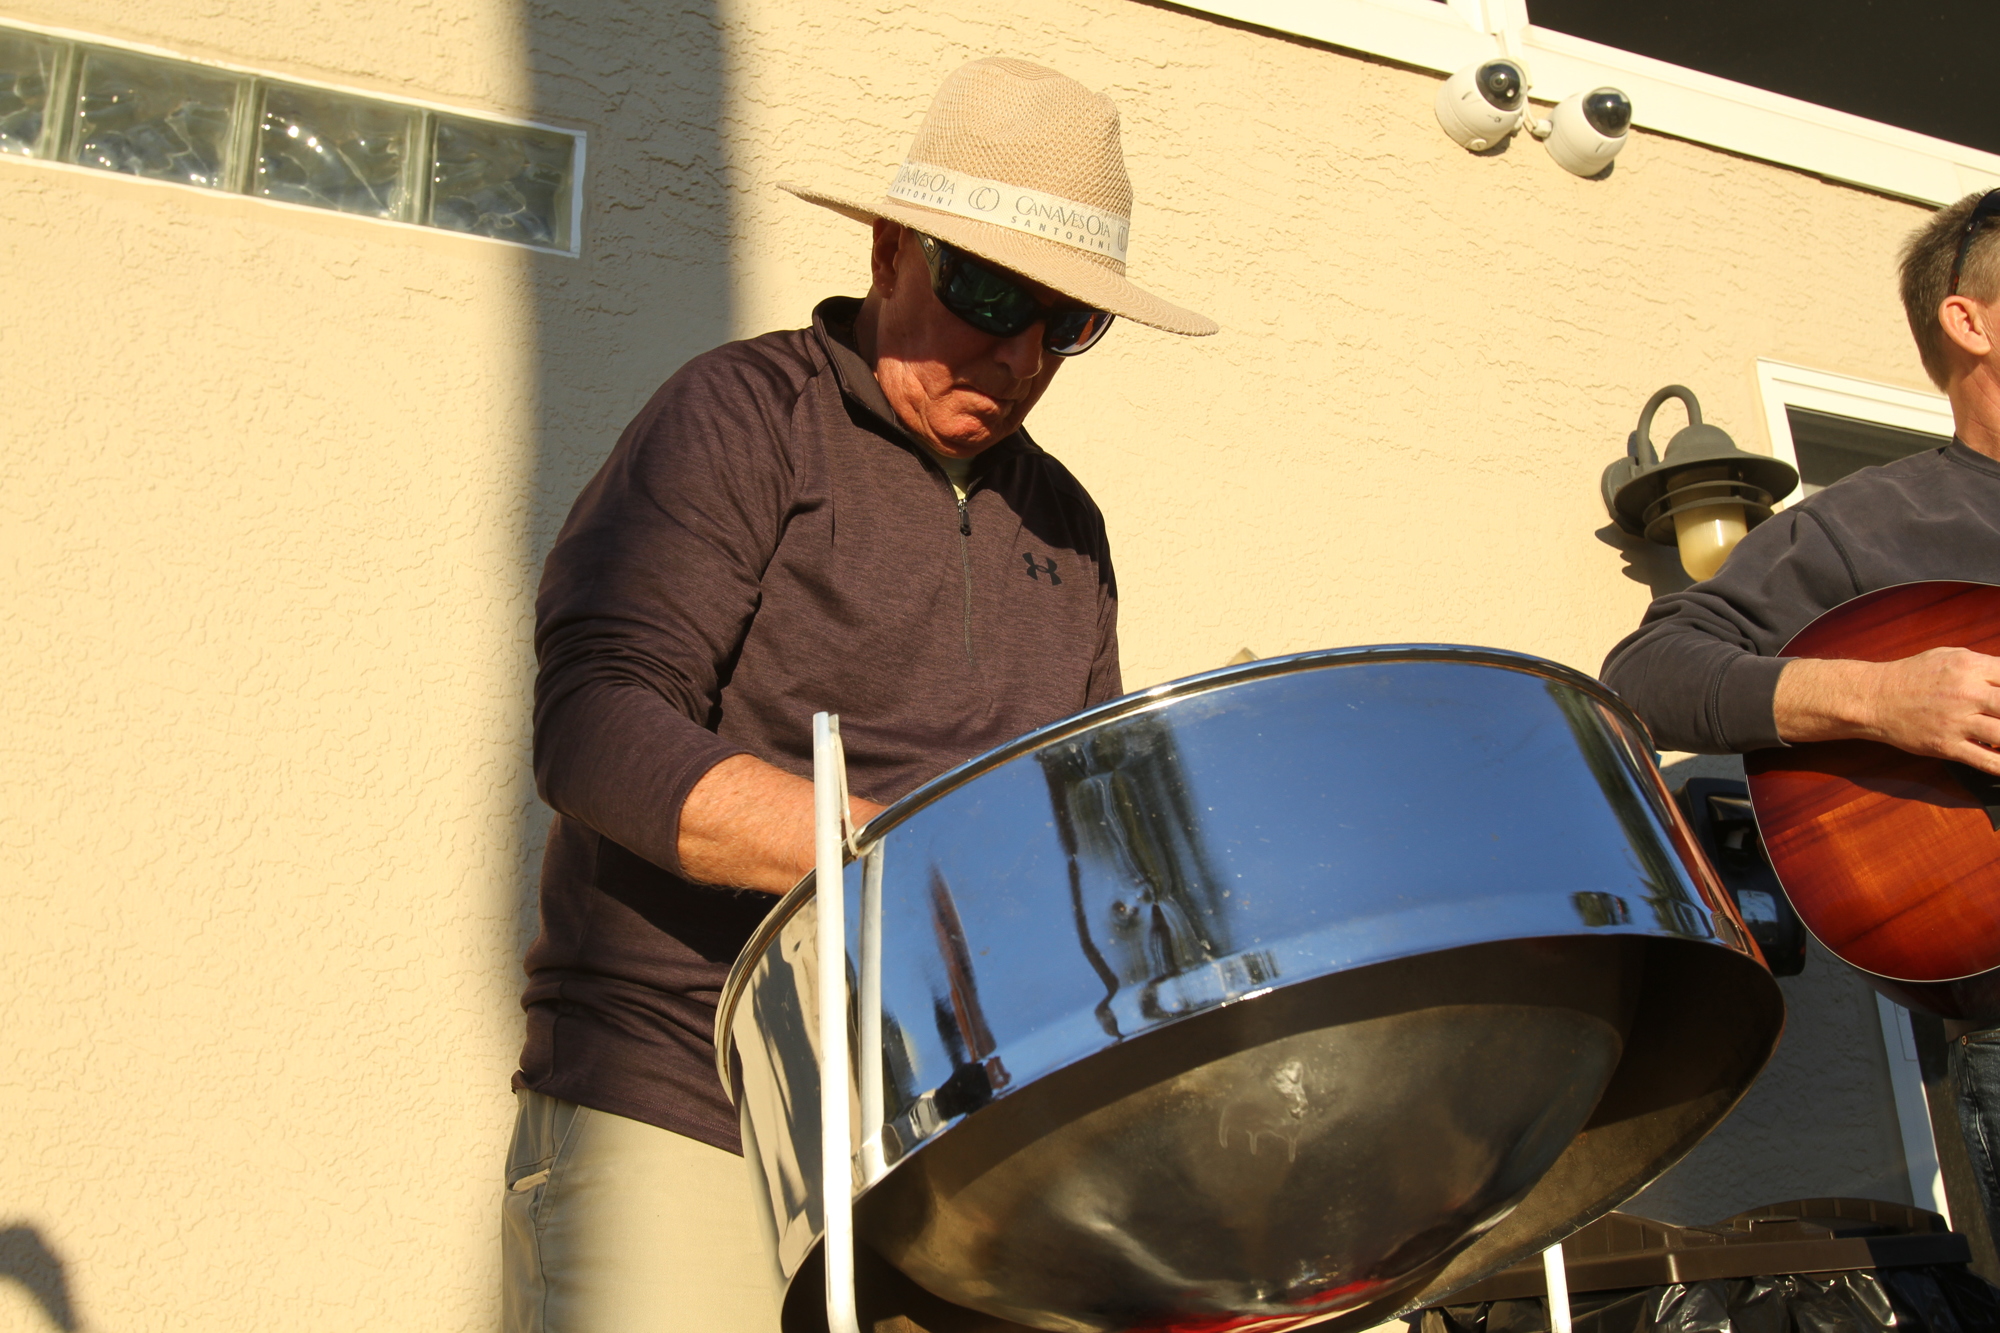 Denny Petersen has worked hard to learn the steel drums, and it's paid off.